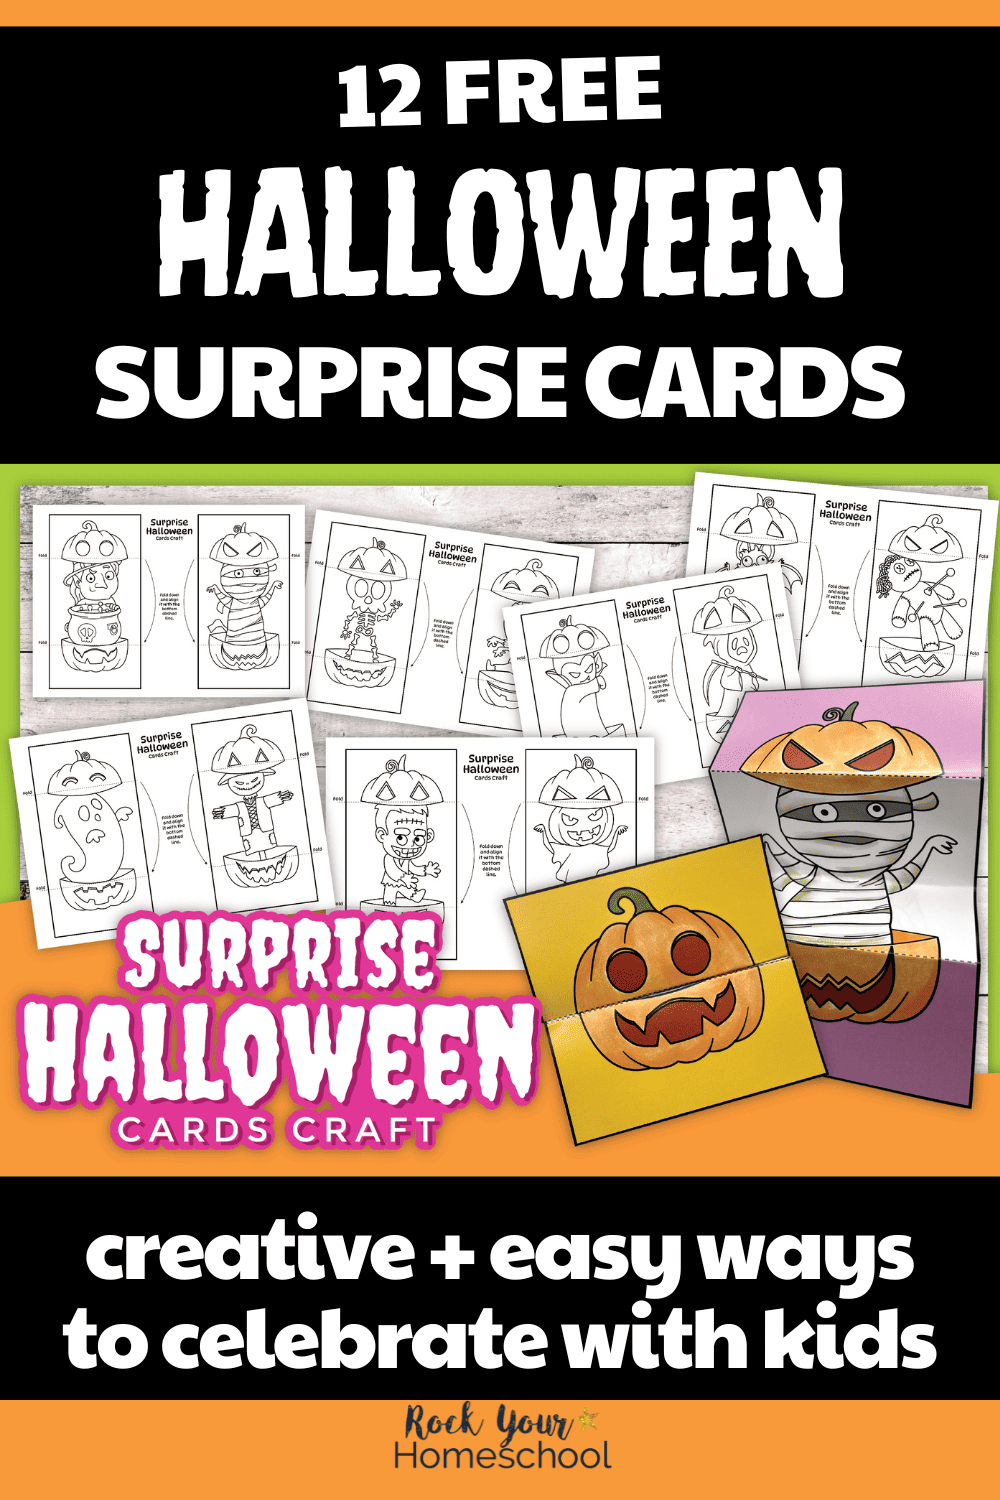 Printable Halloween Cards: Coloring Fun with a Cute Surprise (12 Free)